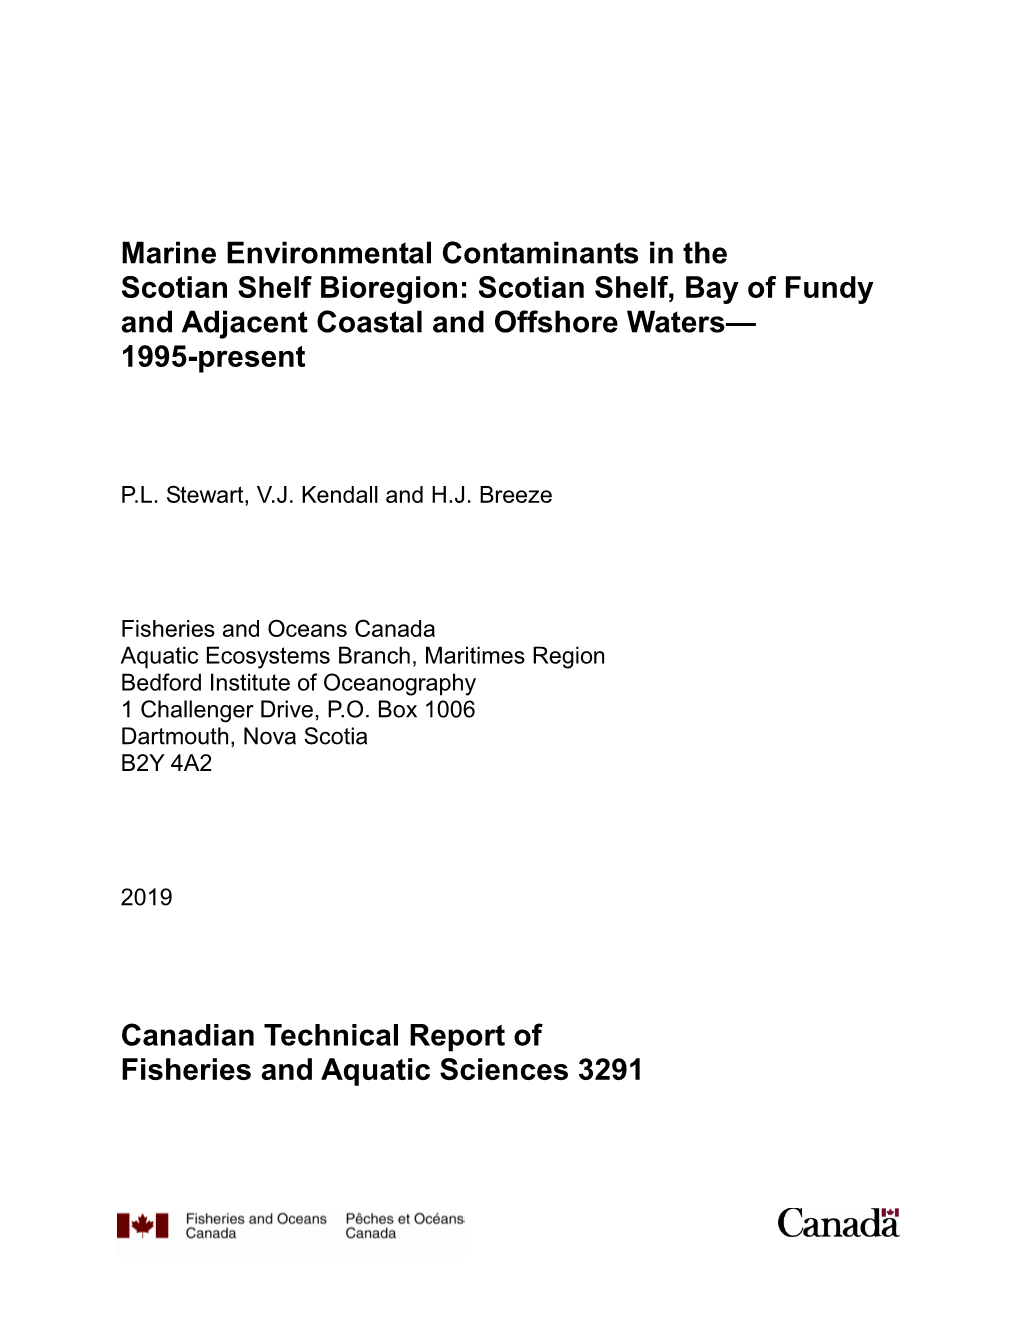 Marine Environmental Contaminants in the Scotian Shelf Bioregion: Scotian Shelf, Bay of Fundy and Adjacent Coastal and Offshore Waters— 1995-Present